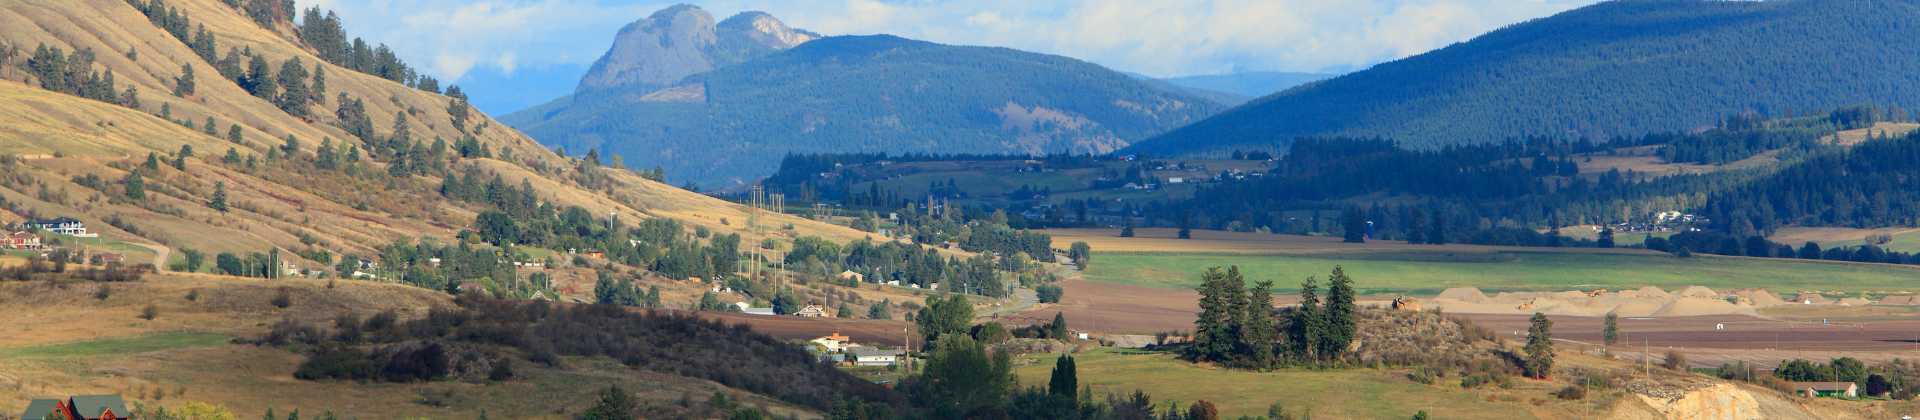 View of the valley and monashee mountains